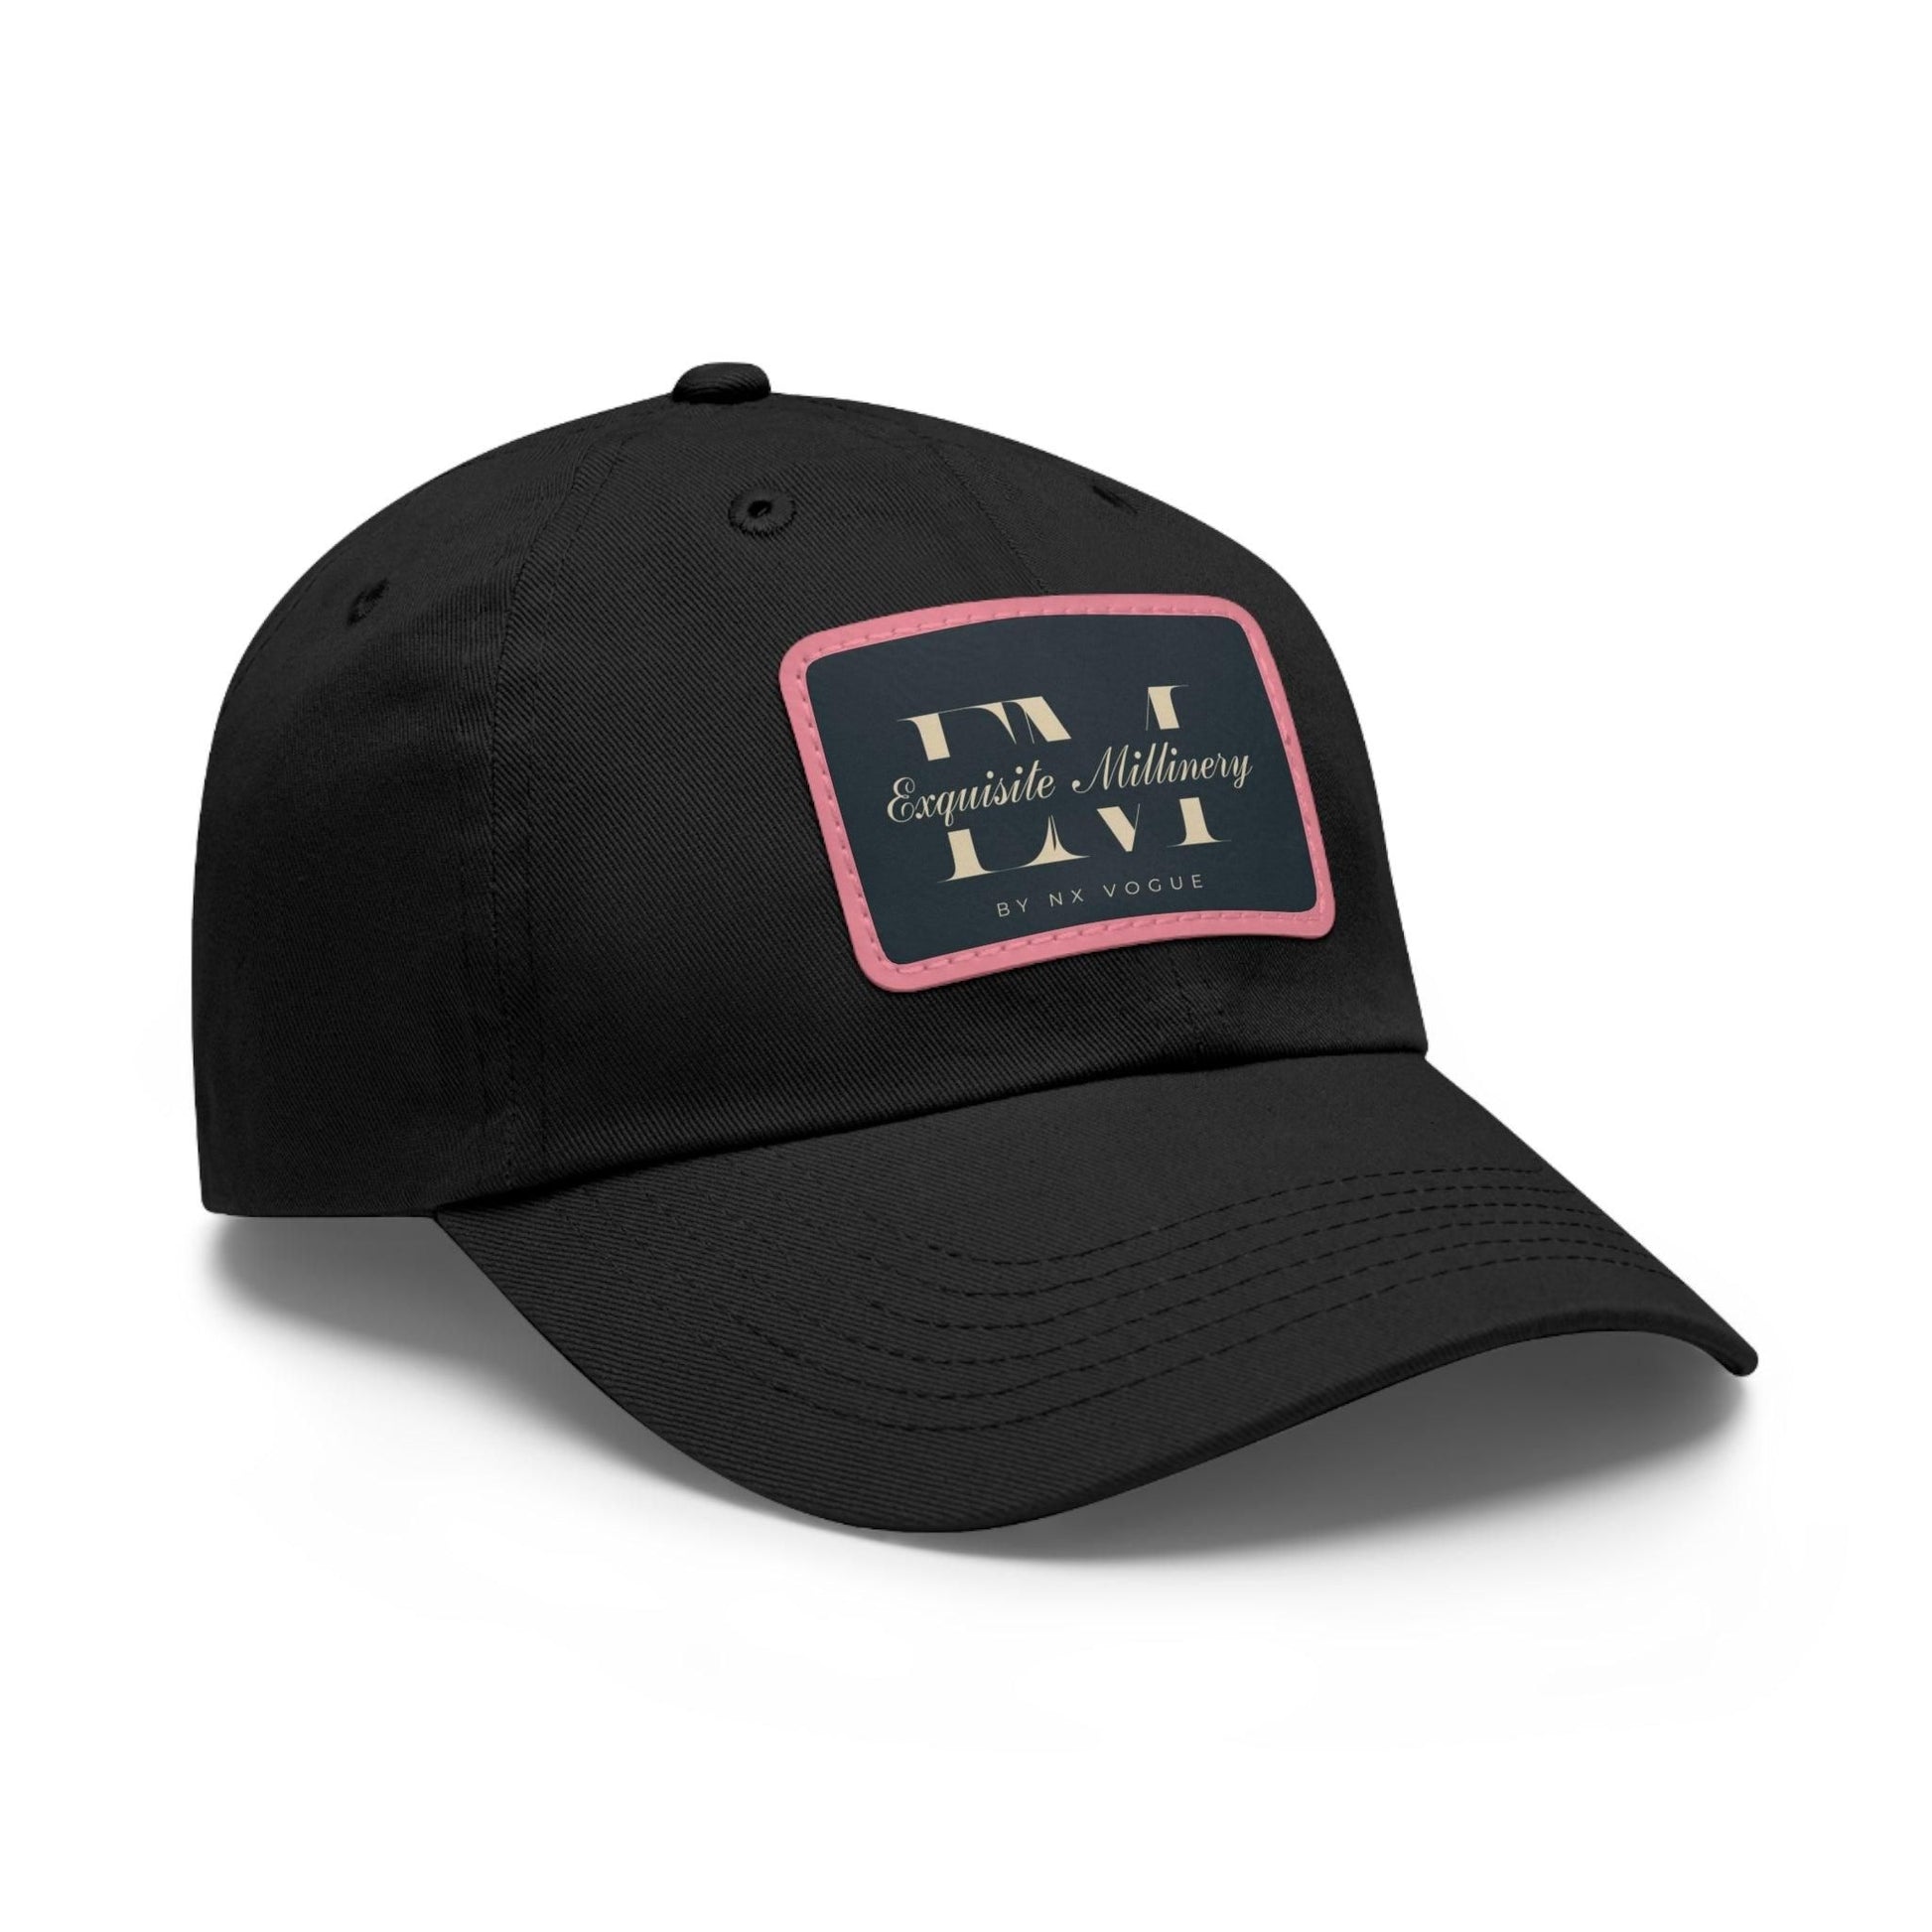 Exquisite Millinery Baseball Cap with Leather Patch Cap Black / Pink patch Rectangle One size